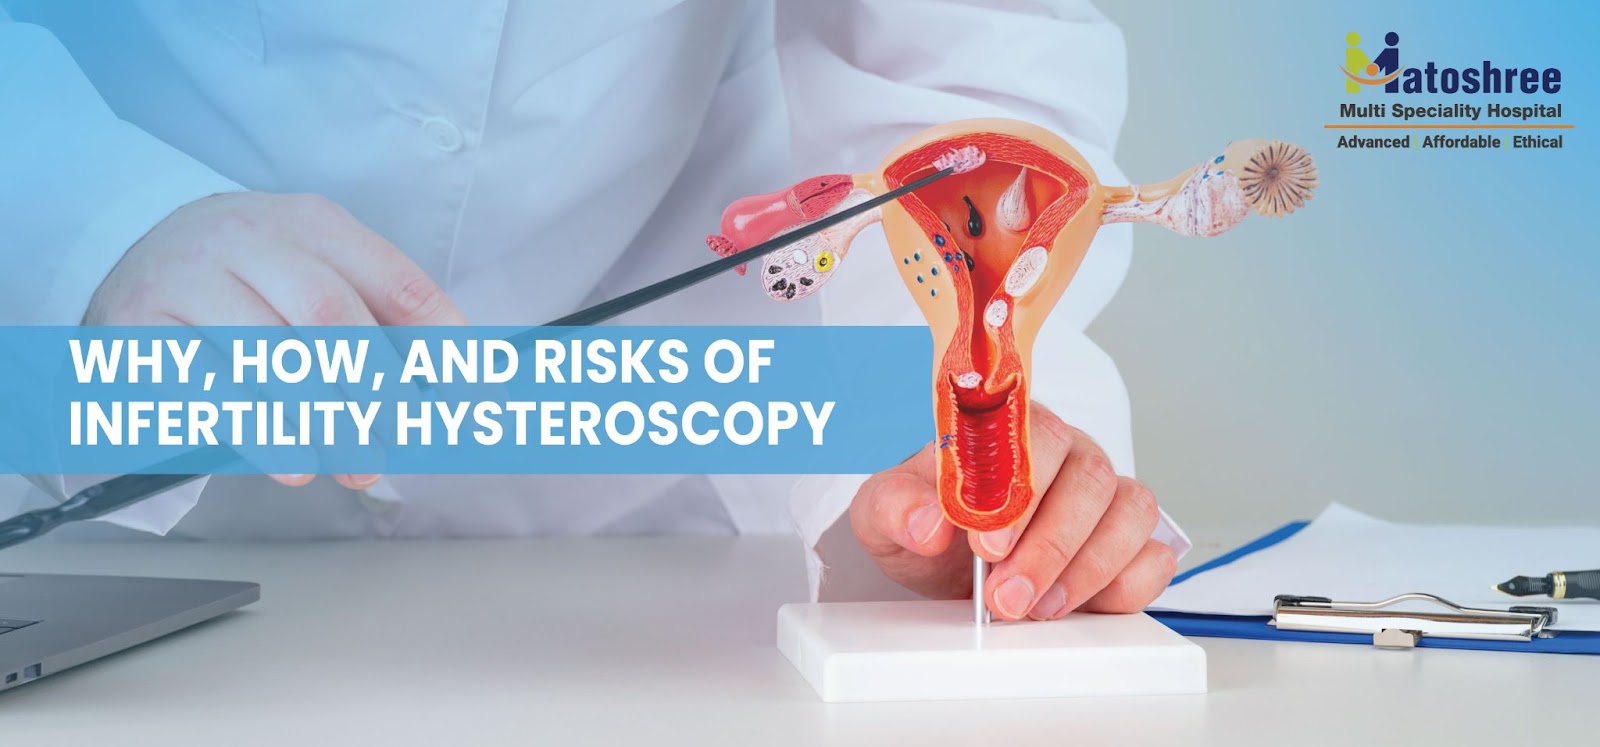 Why, How, and Risks of Infertility Hysteroscopy